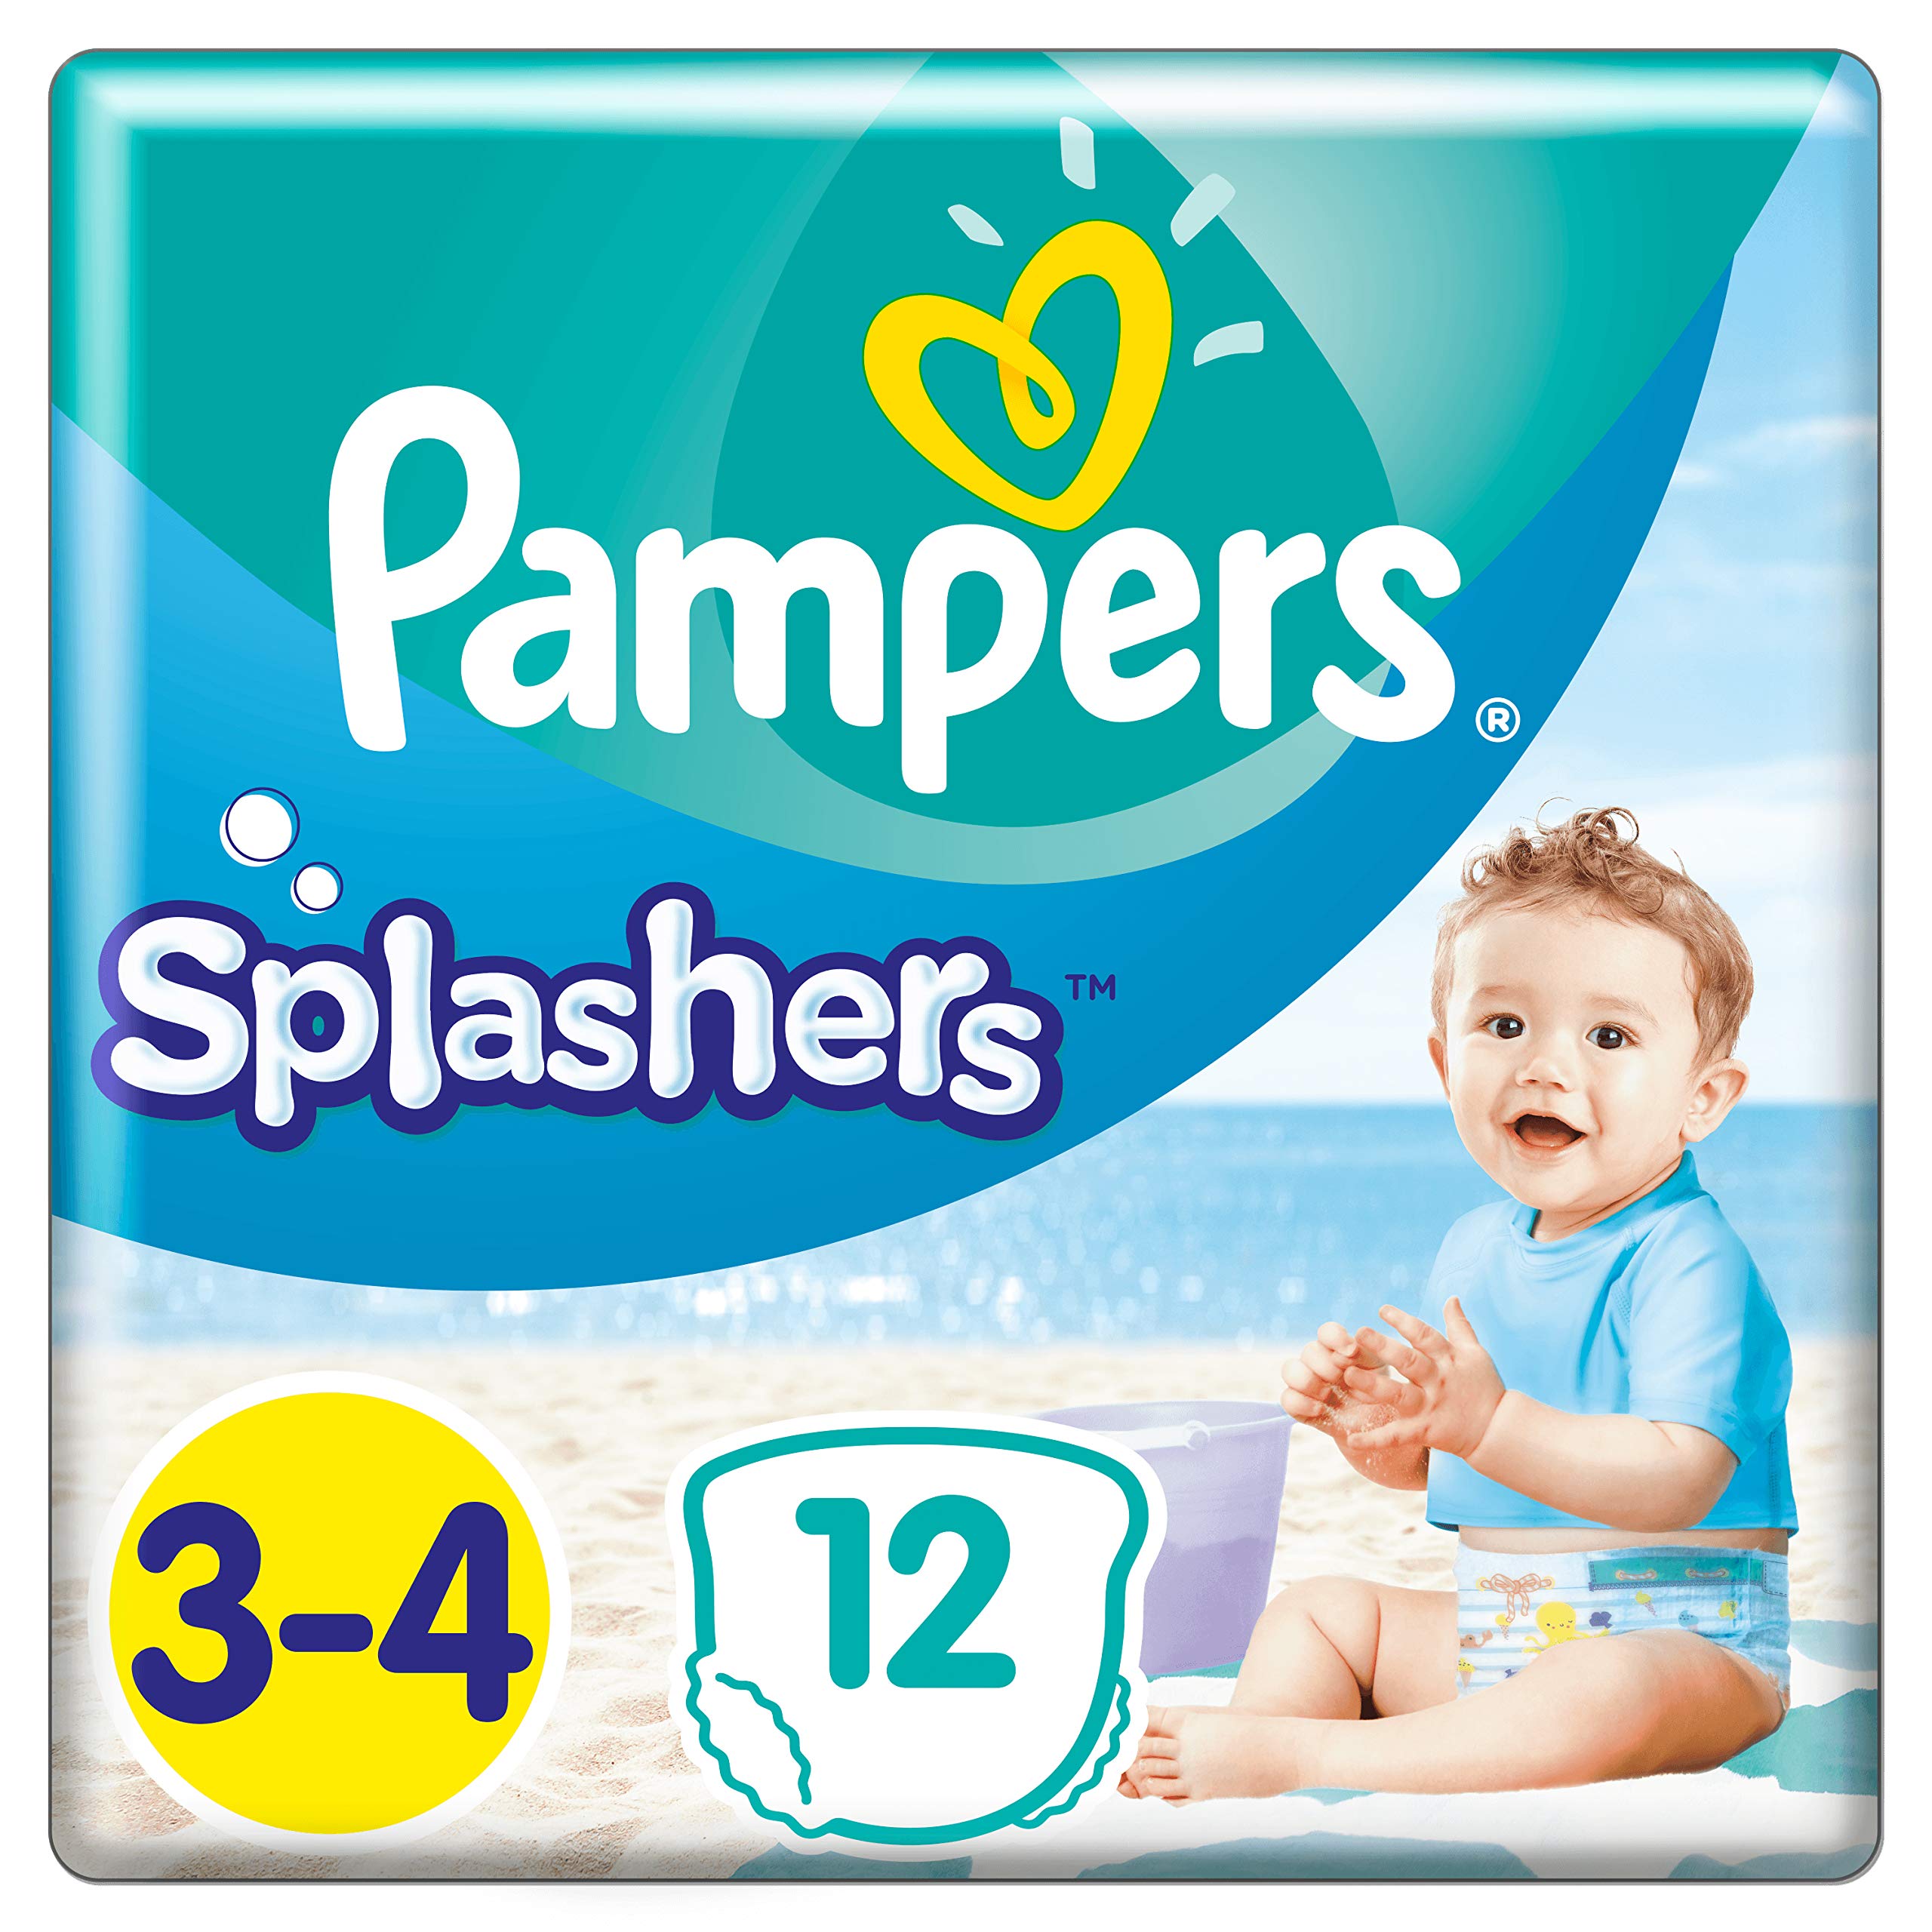 Pampers Splashers Disposable Swim Nappies Size 3-4 (6-11 kg) for Optimal Protection in The Water, 12 Nappies